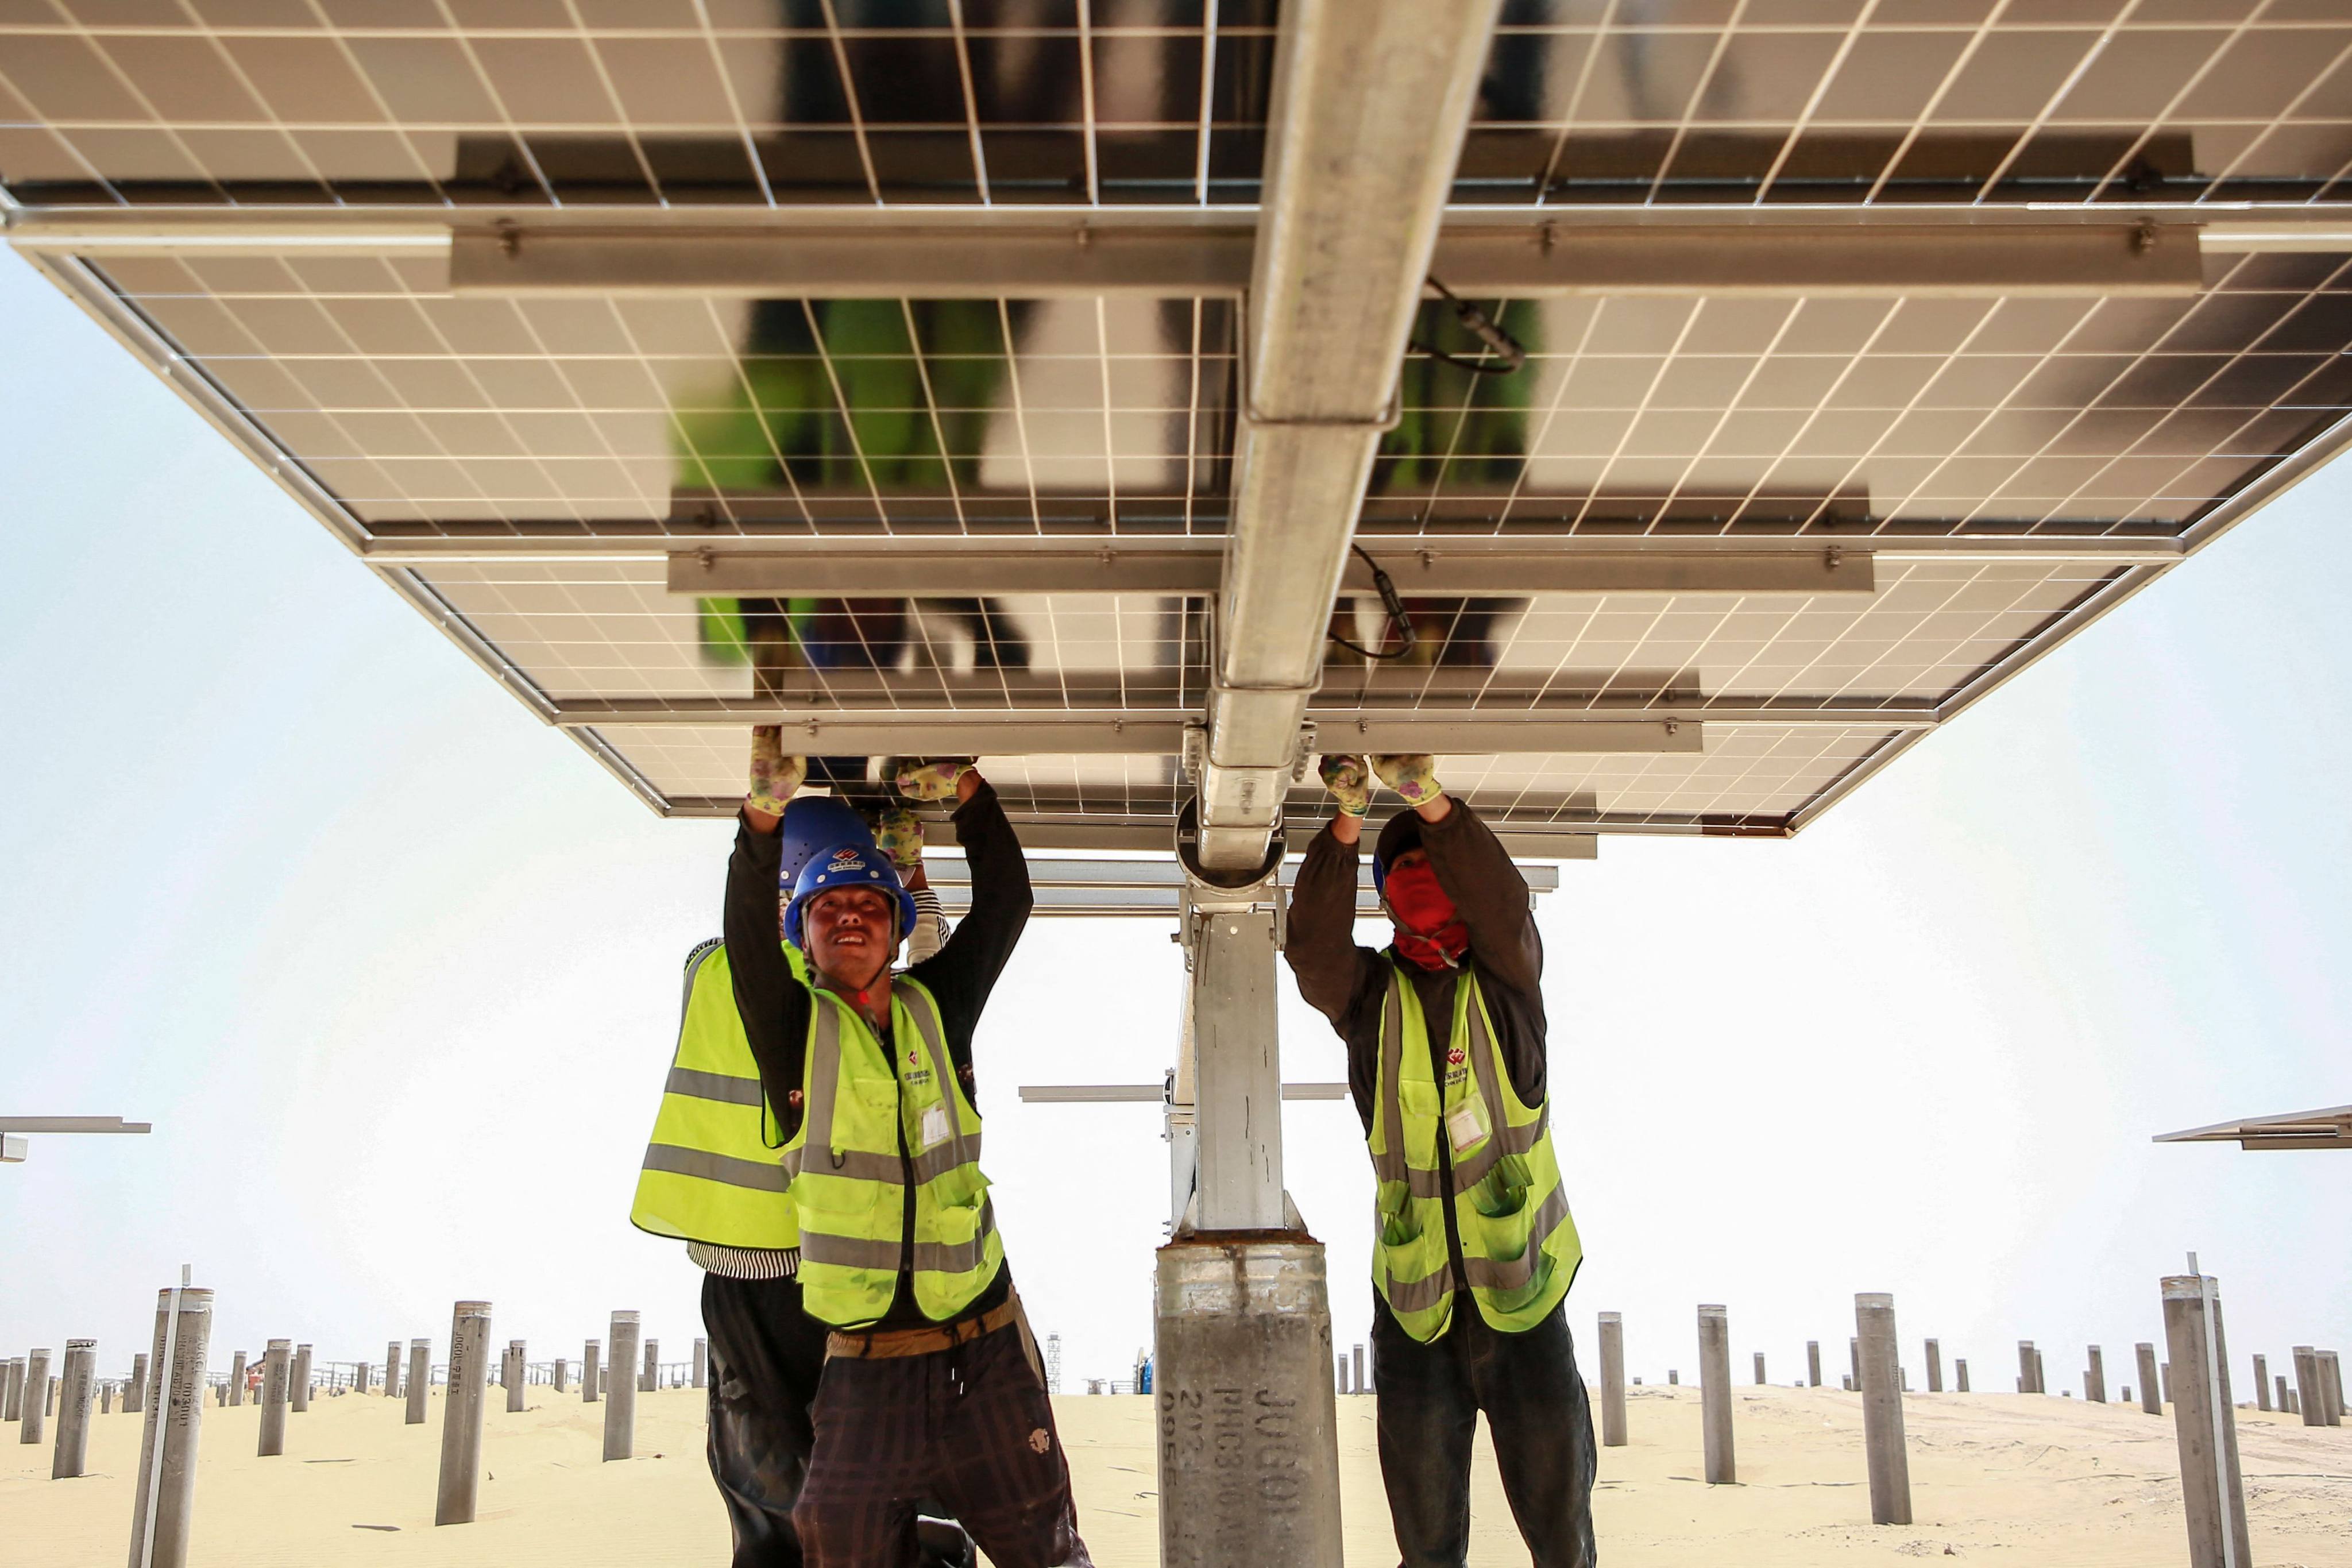 Workers install photovoltaic panels in Zhongwei, in China’s northern Ningxia region on May 9. Research has shown that nearly 20 per cent of the bonds put on the market by local governments in 2022 could potentially qualify as green bonds. Photo: AFP